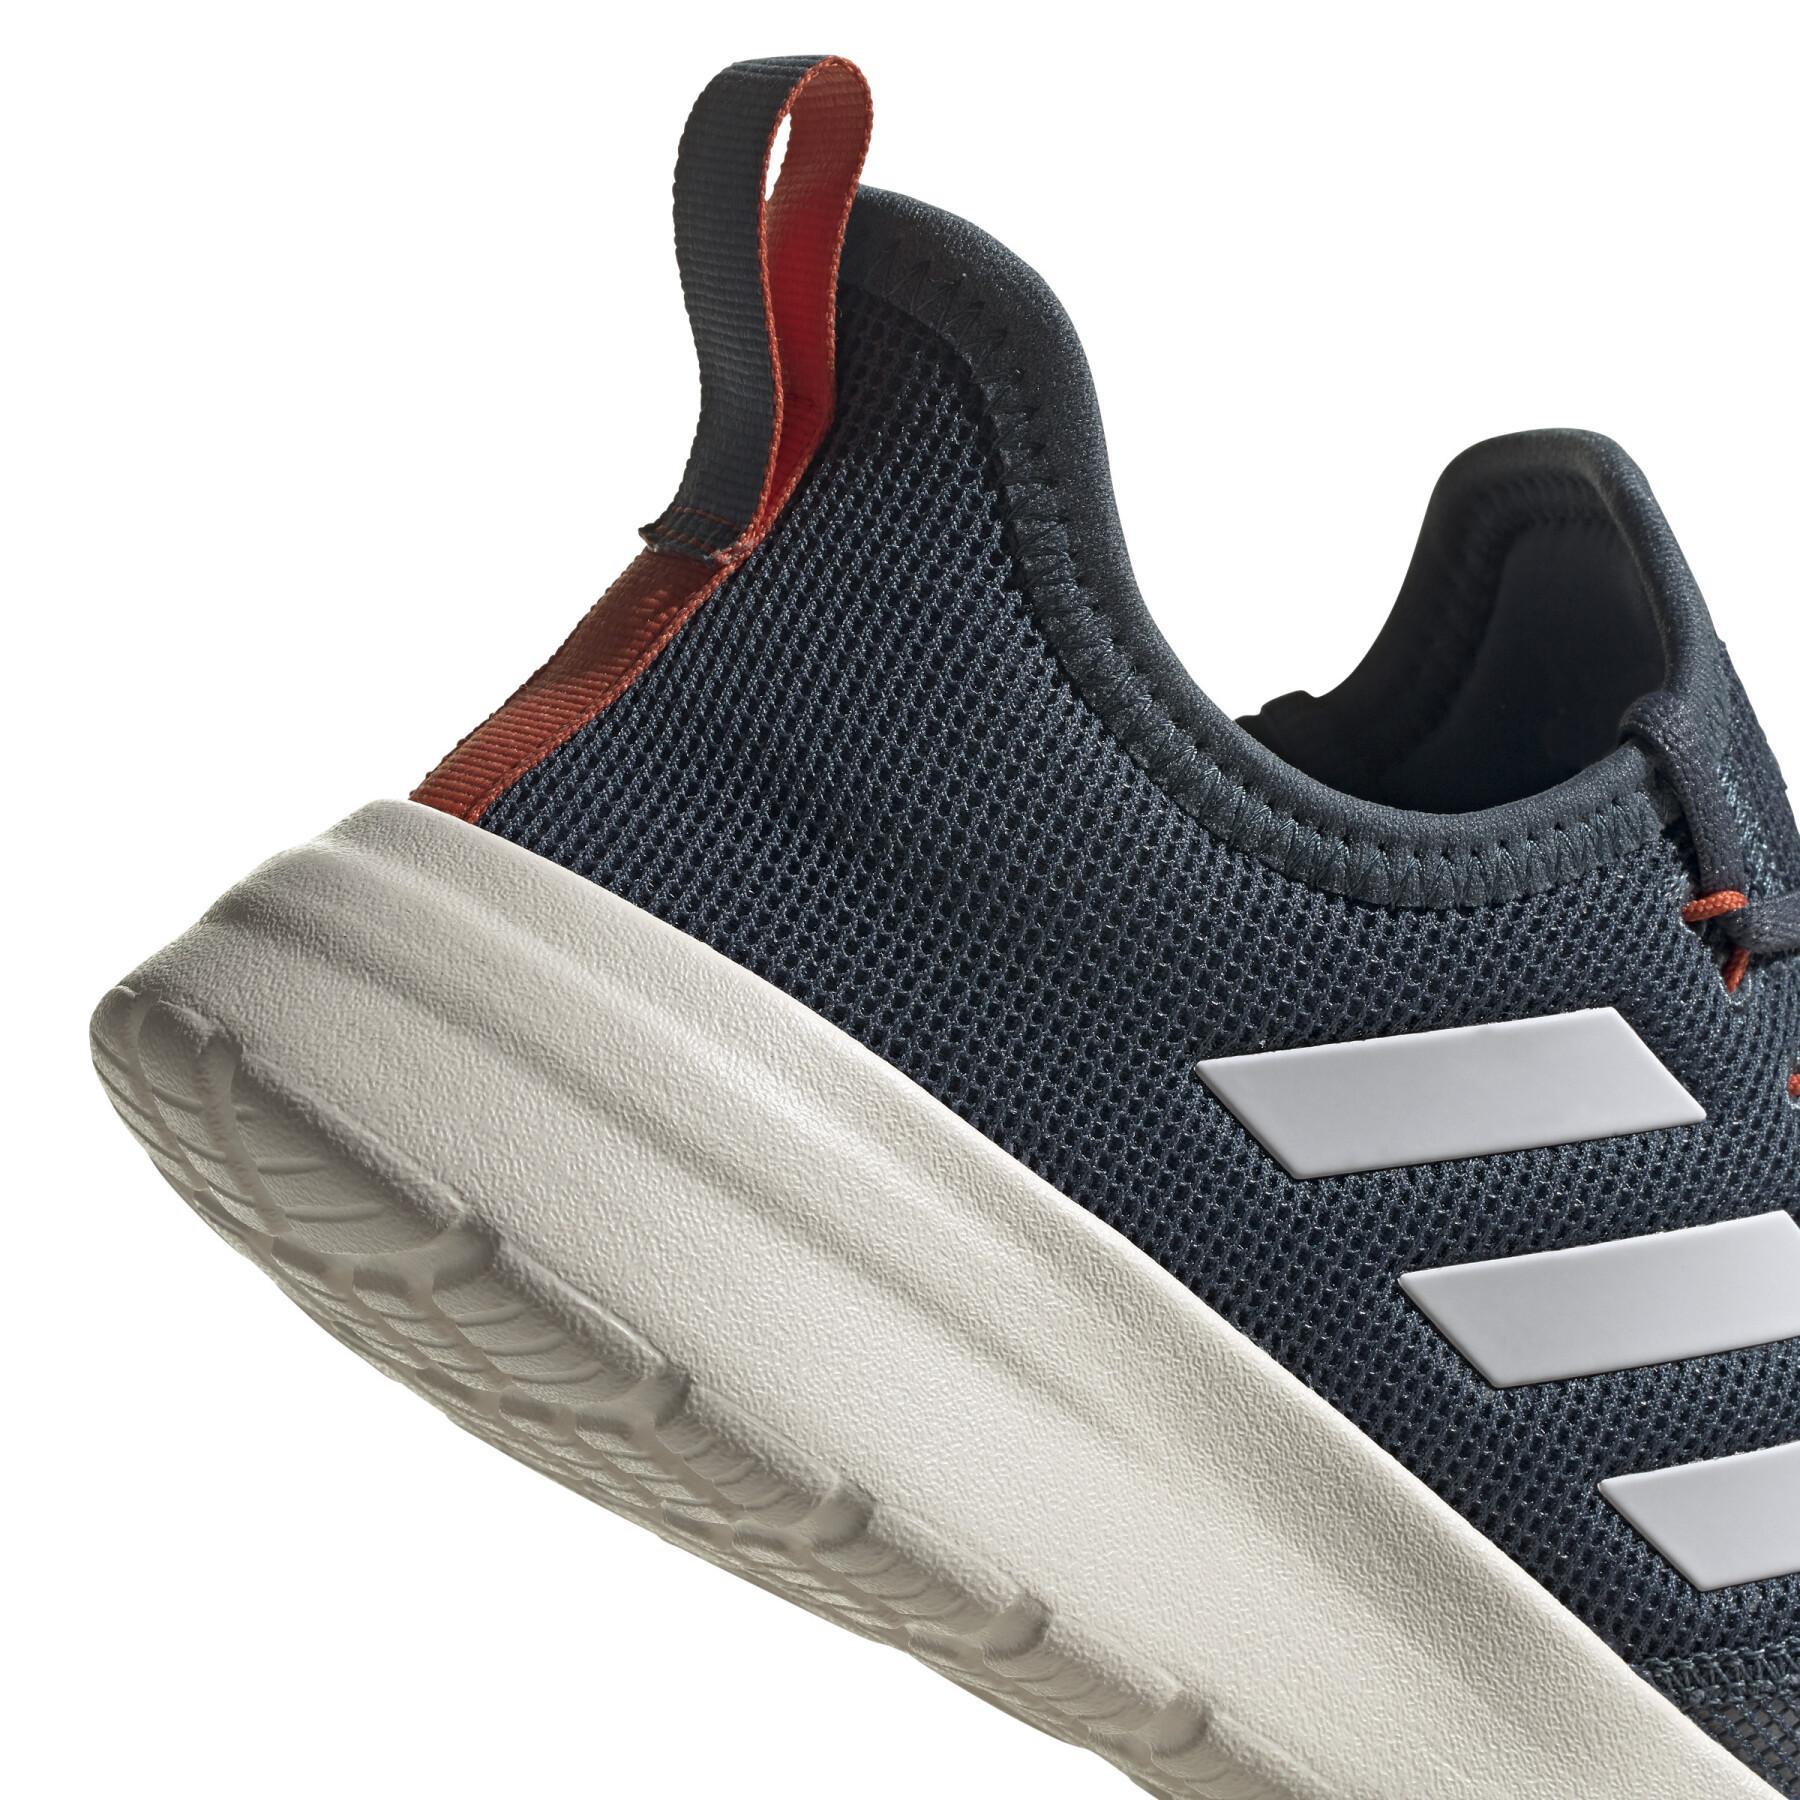 Shoes adidas Lite Racer RBN